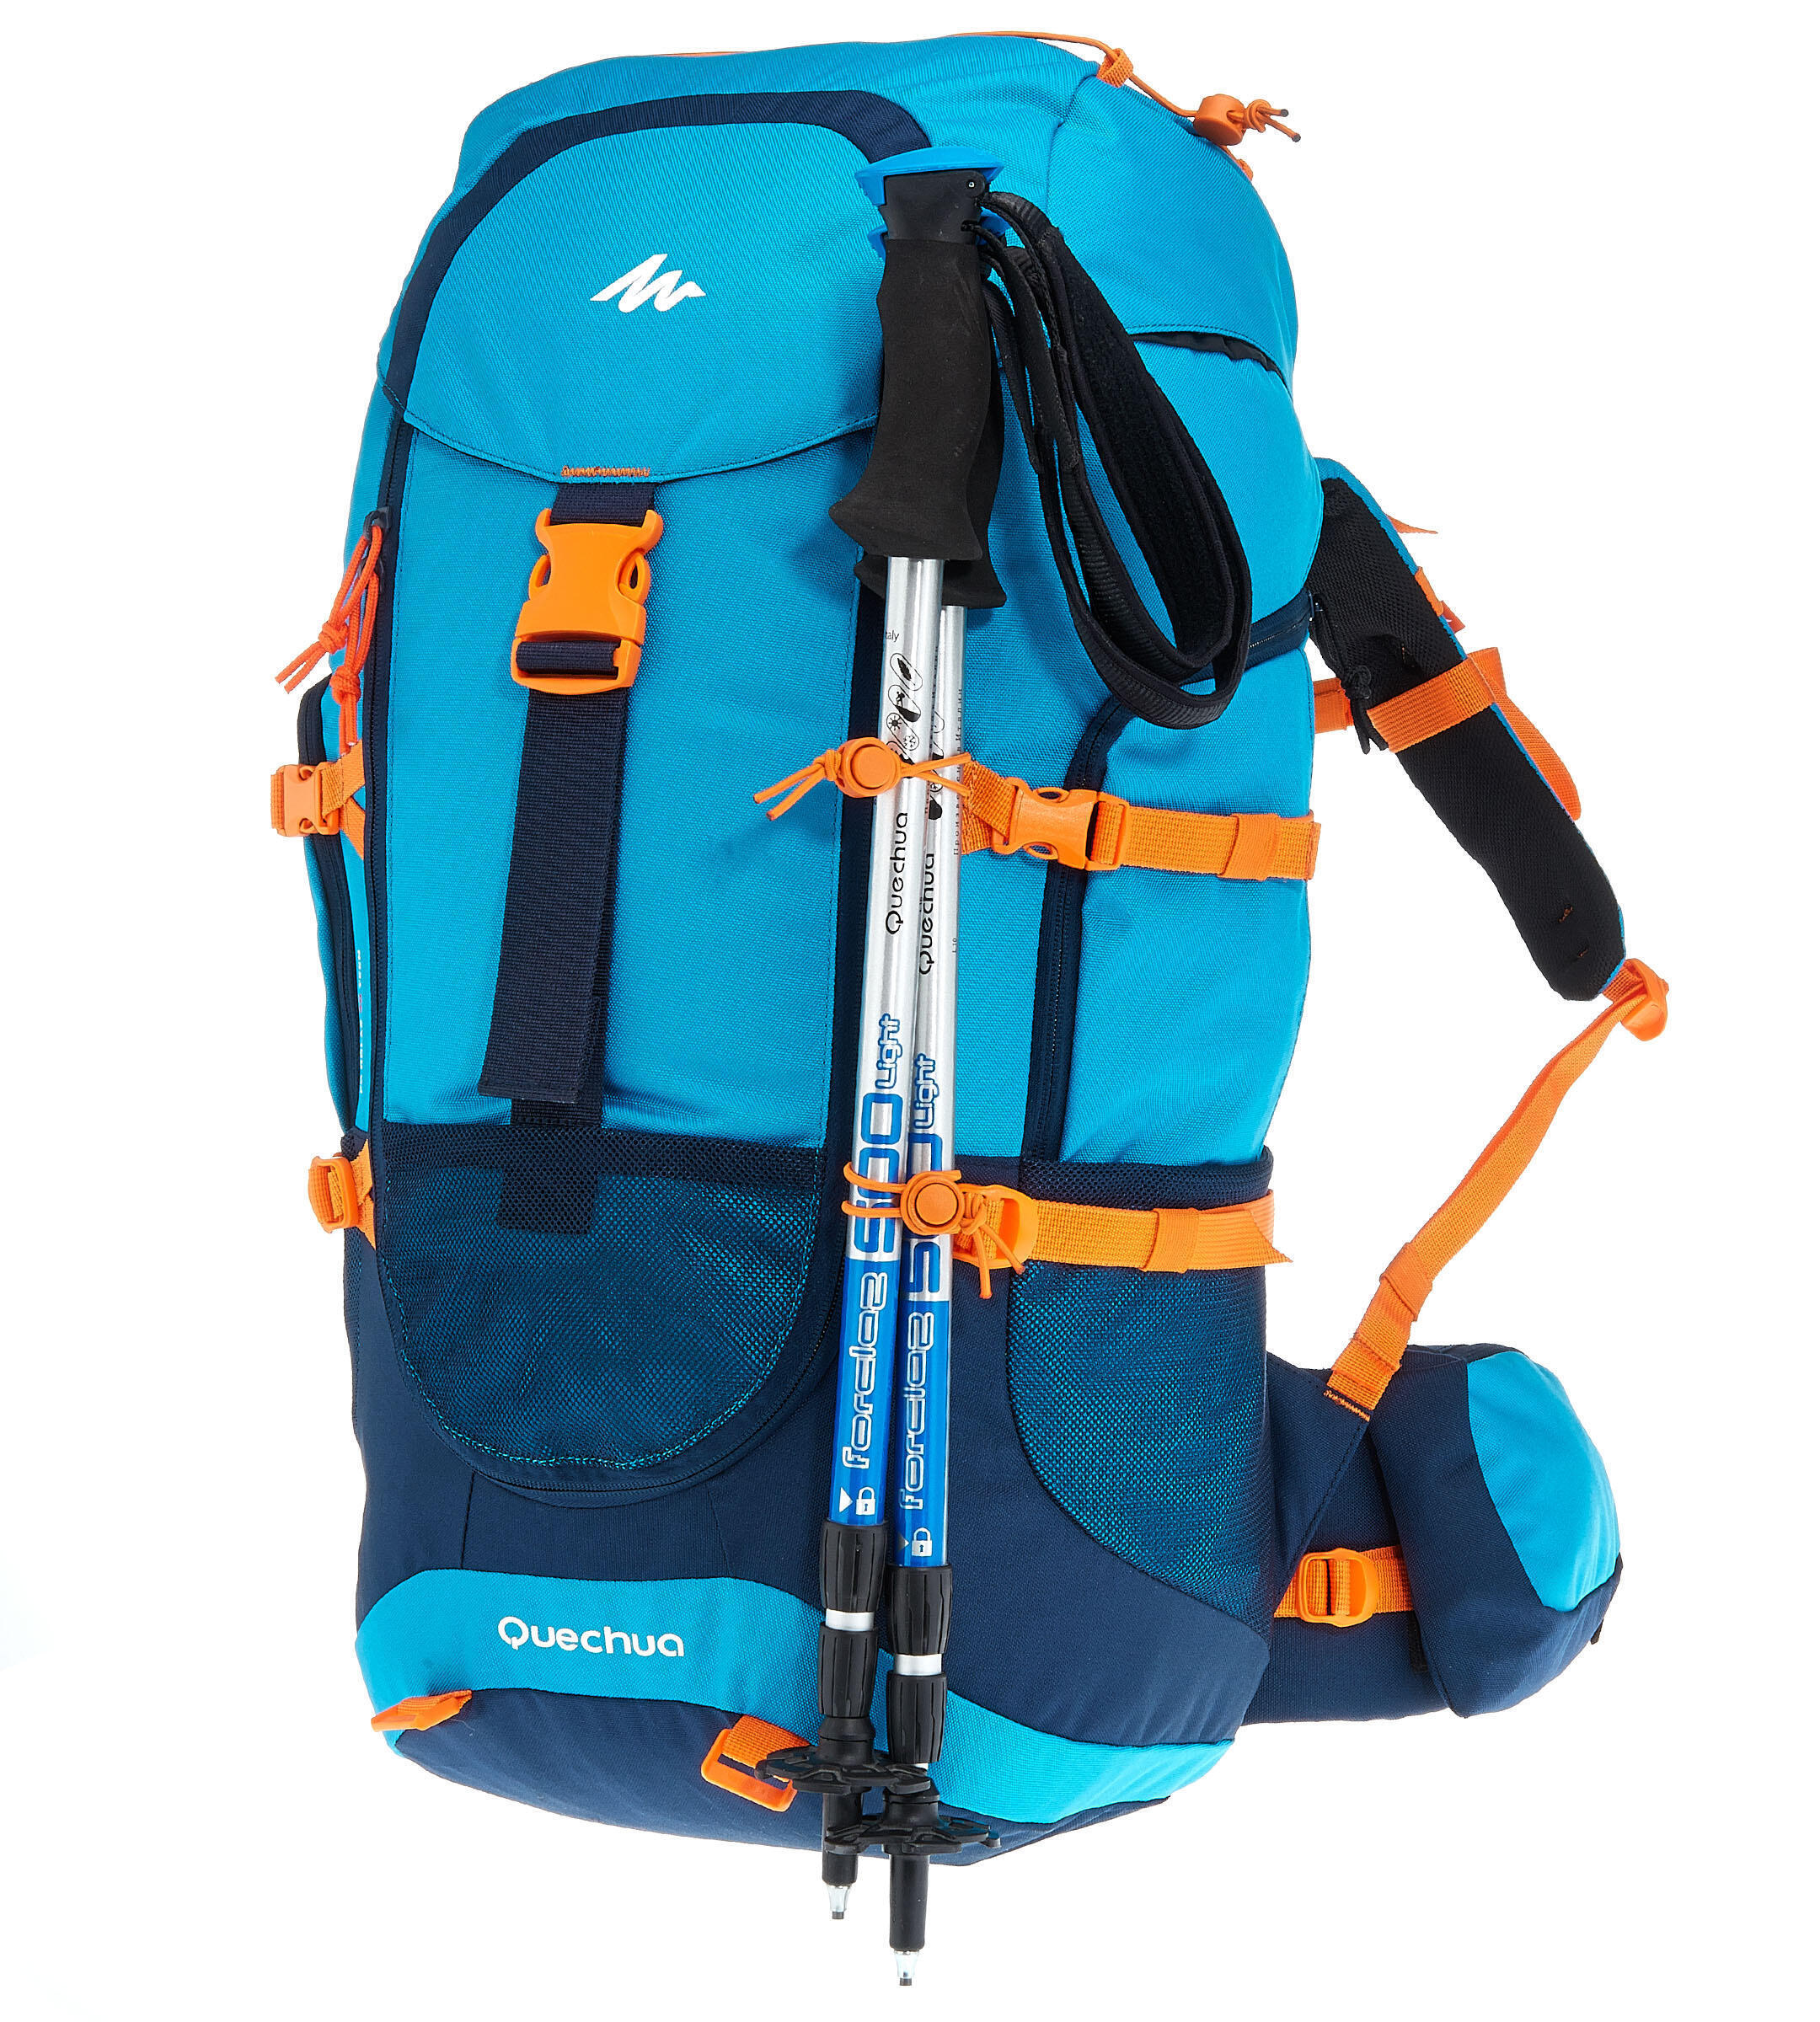 Where can I attach my A200 poles on my backpack? 